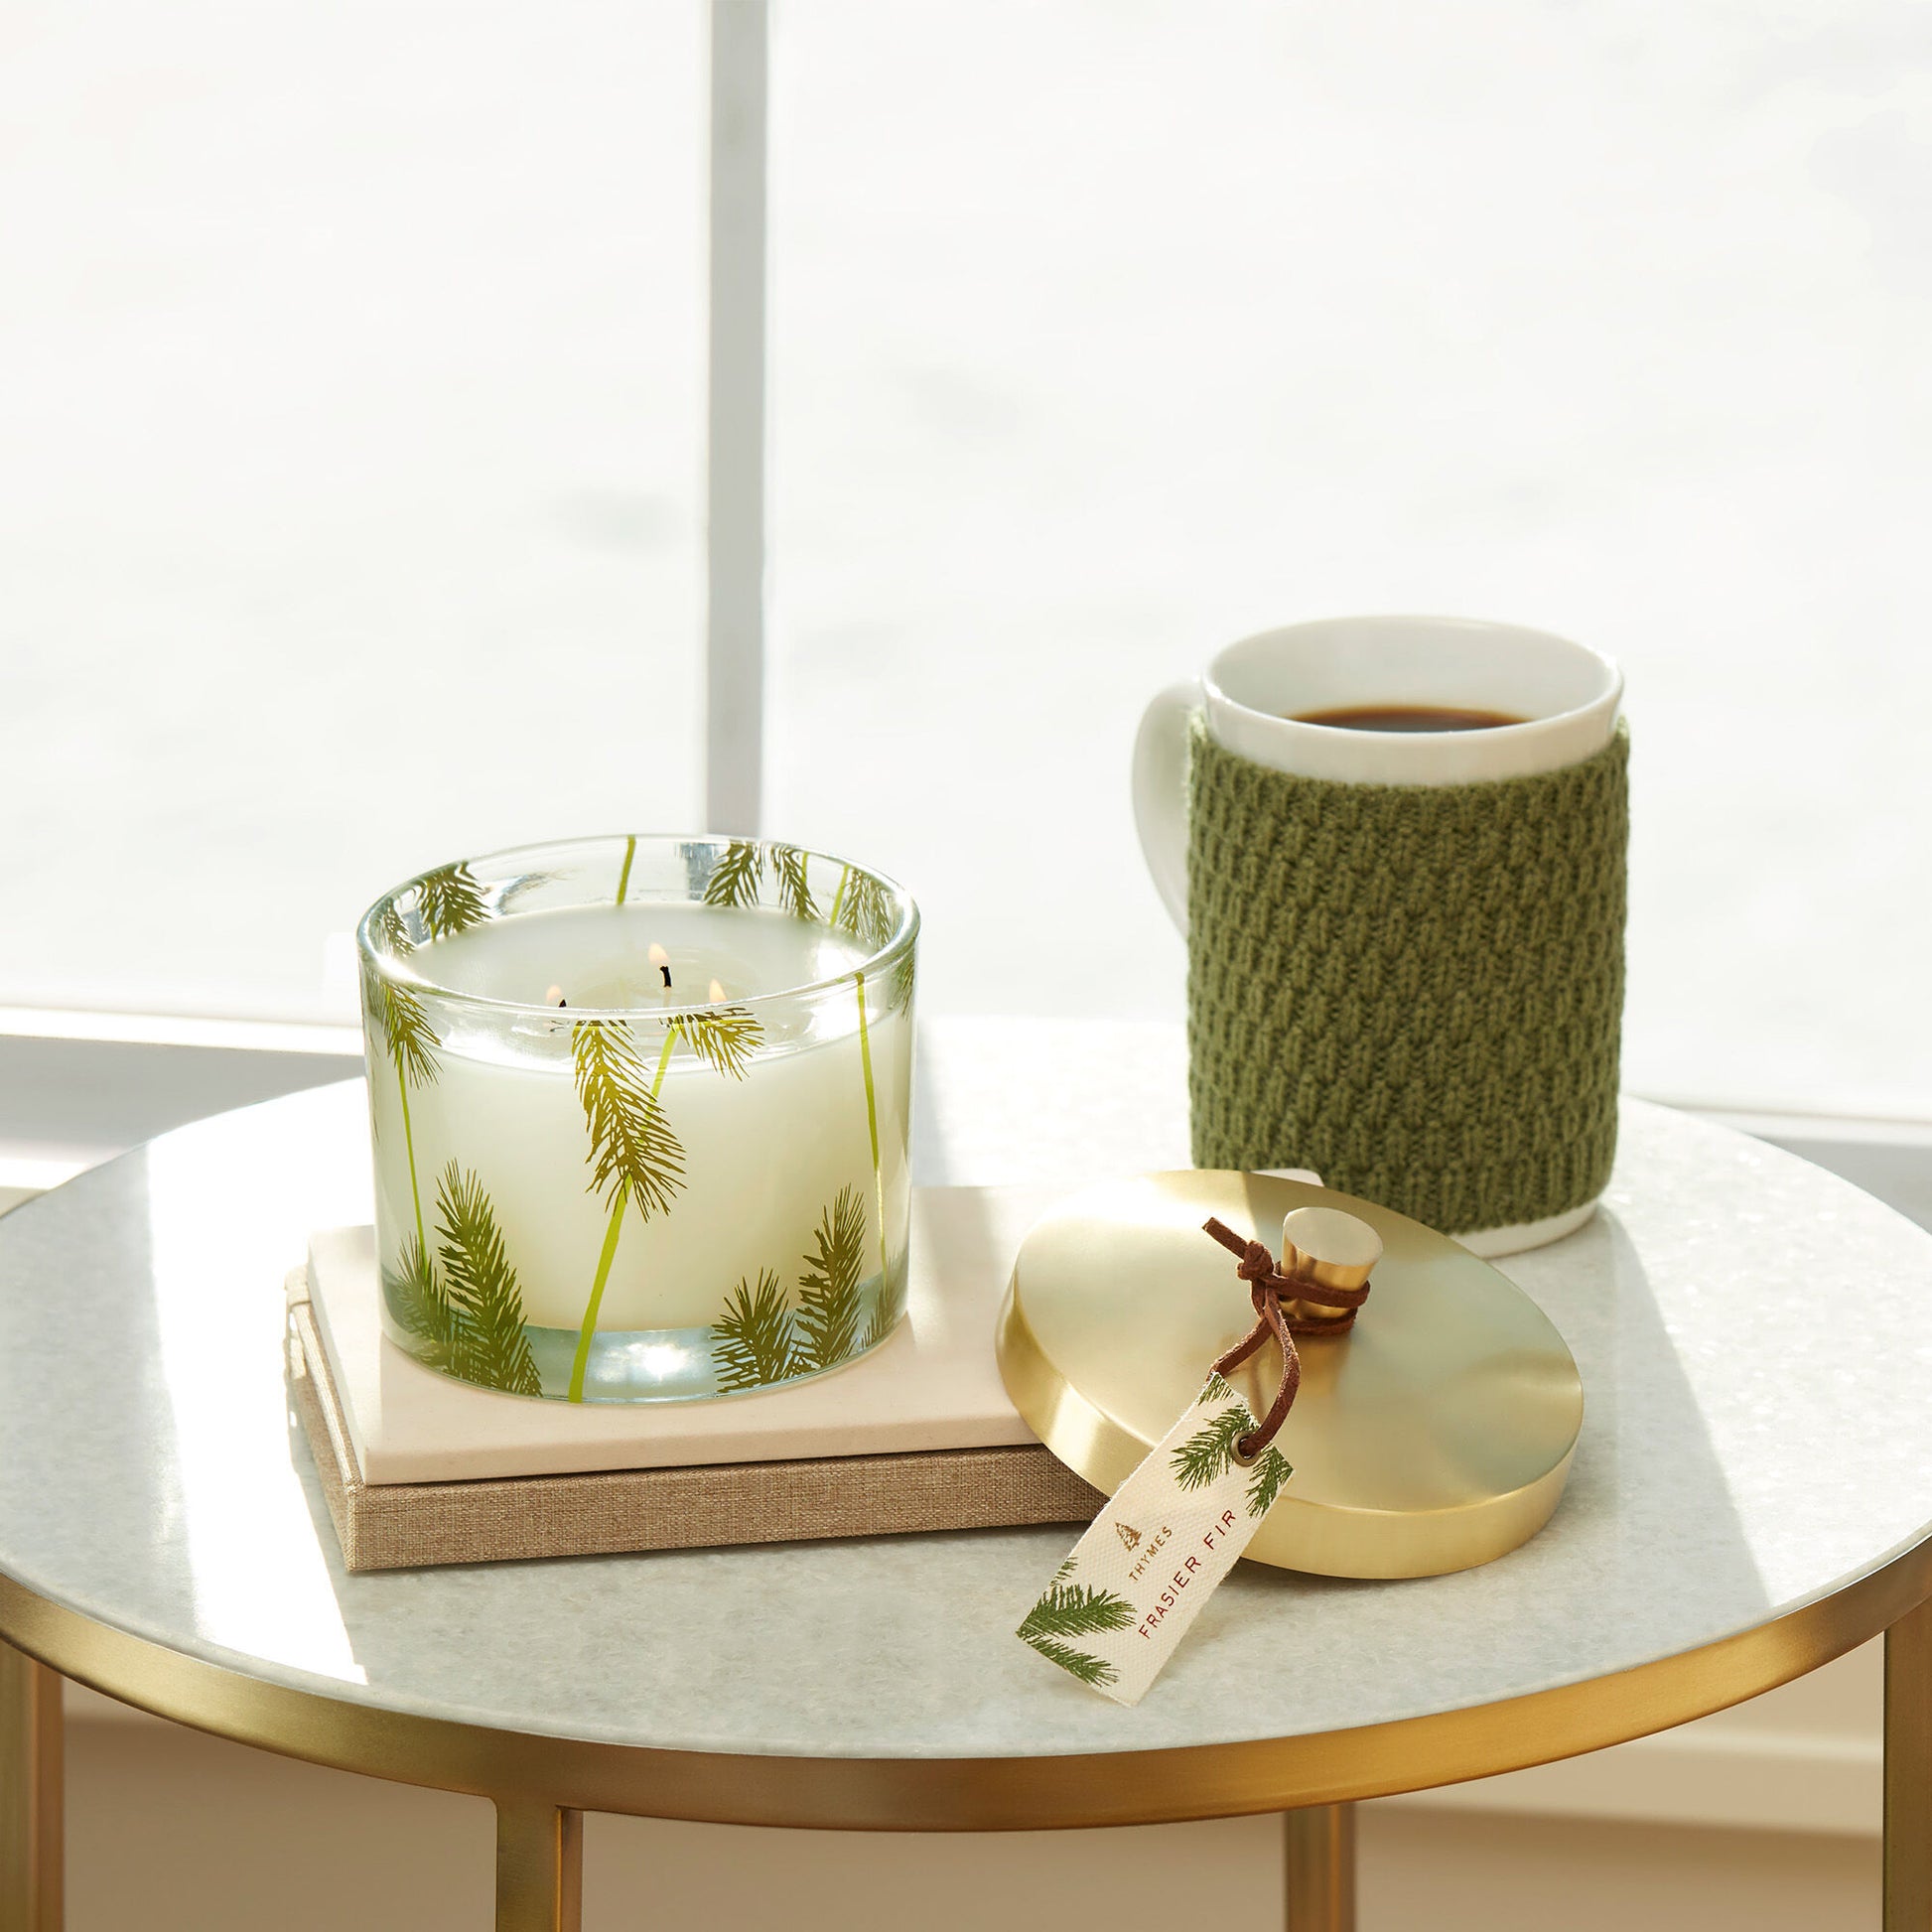 Thymes Frasier Fir Pine Needle 3-Wick Candle-Candles-Thymes-The Village Shoppe, Women’s Fashion Boutique, Shop Online and In Store - Located in Muscle Shoals, AL.